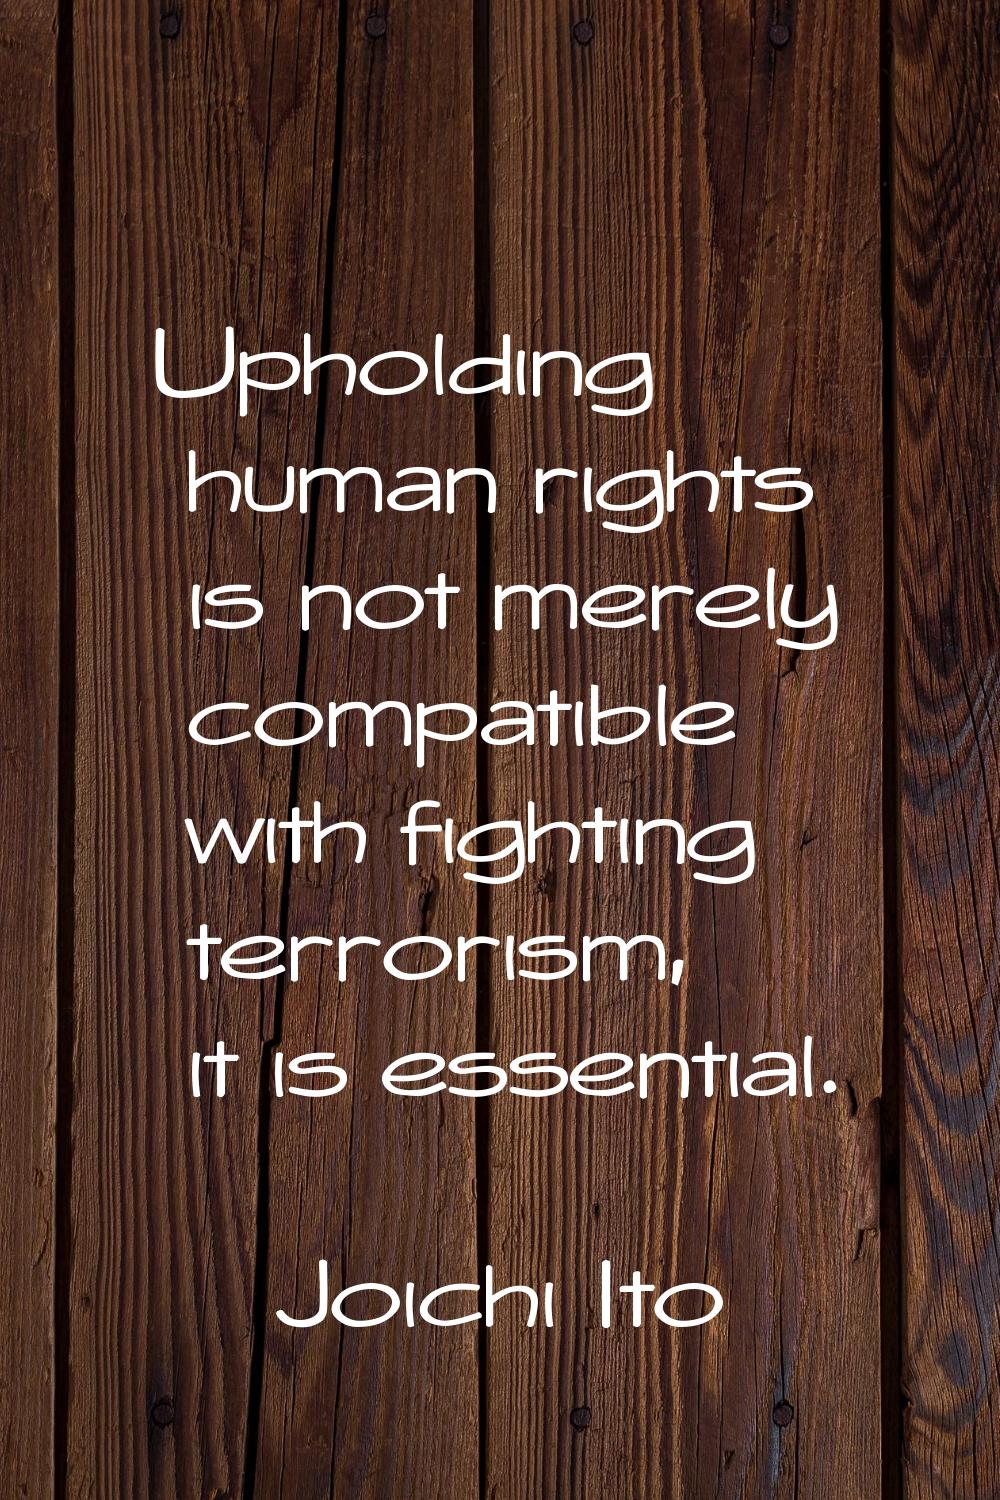 Upholding human rights is not merely compatible with fighting terrorism, it is essential.